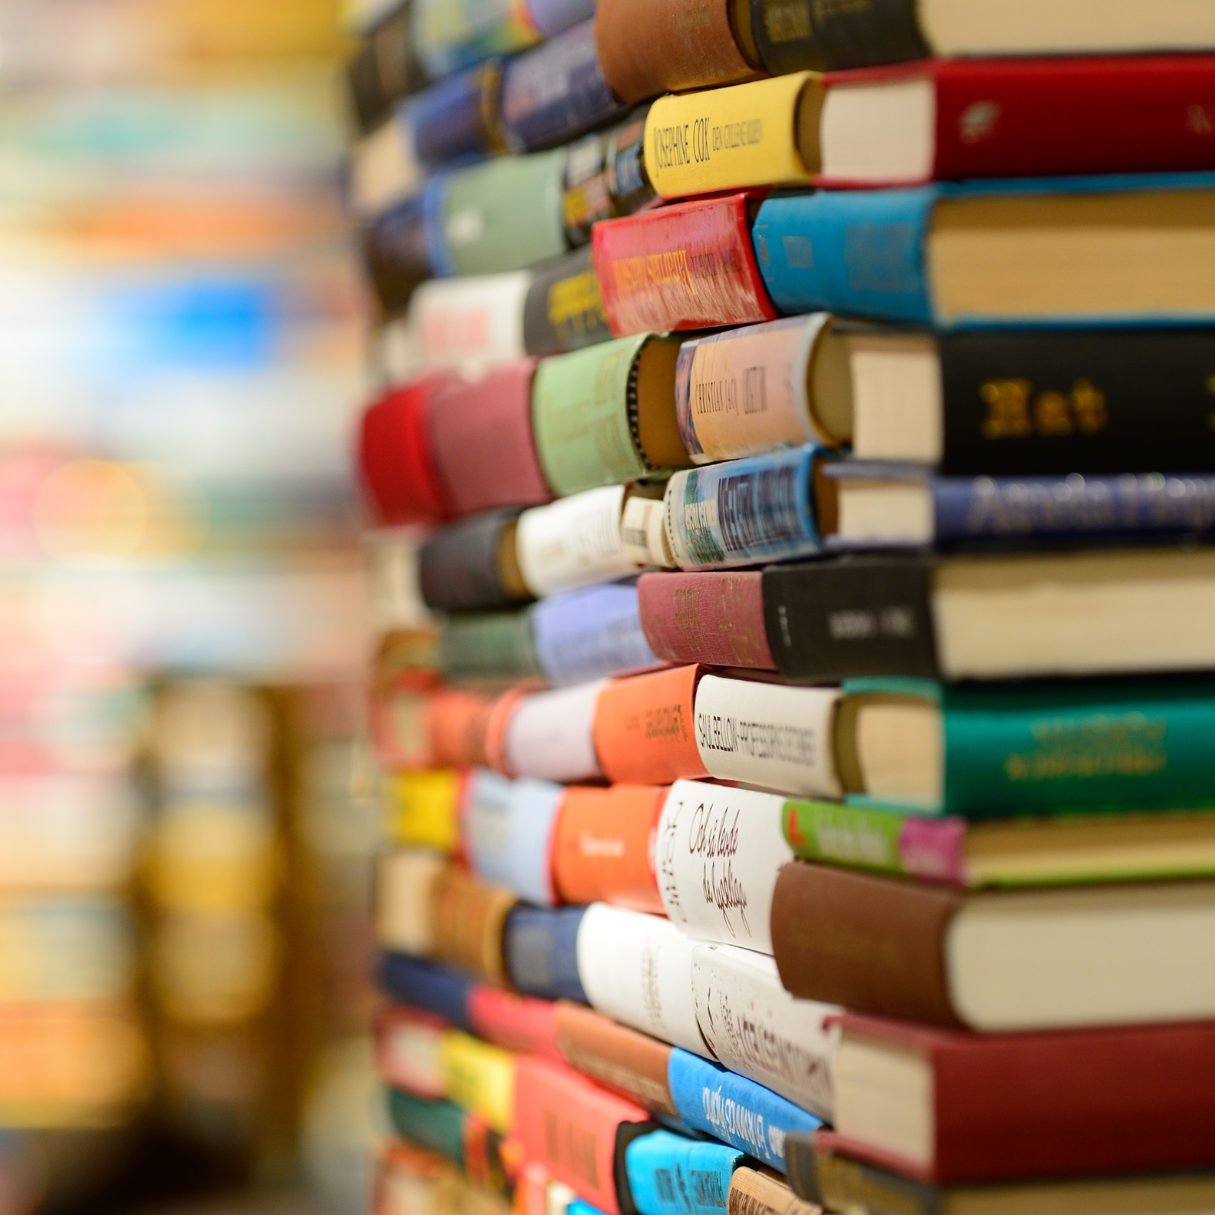 A side profile of a large stack of colourful hardcover books.